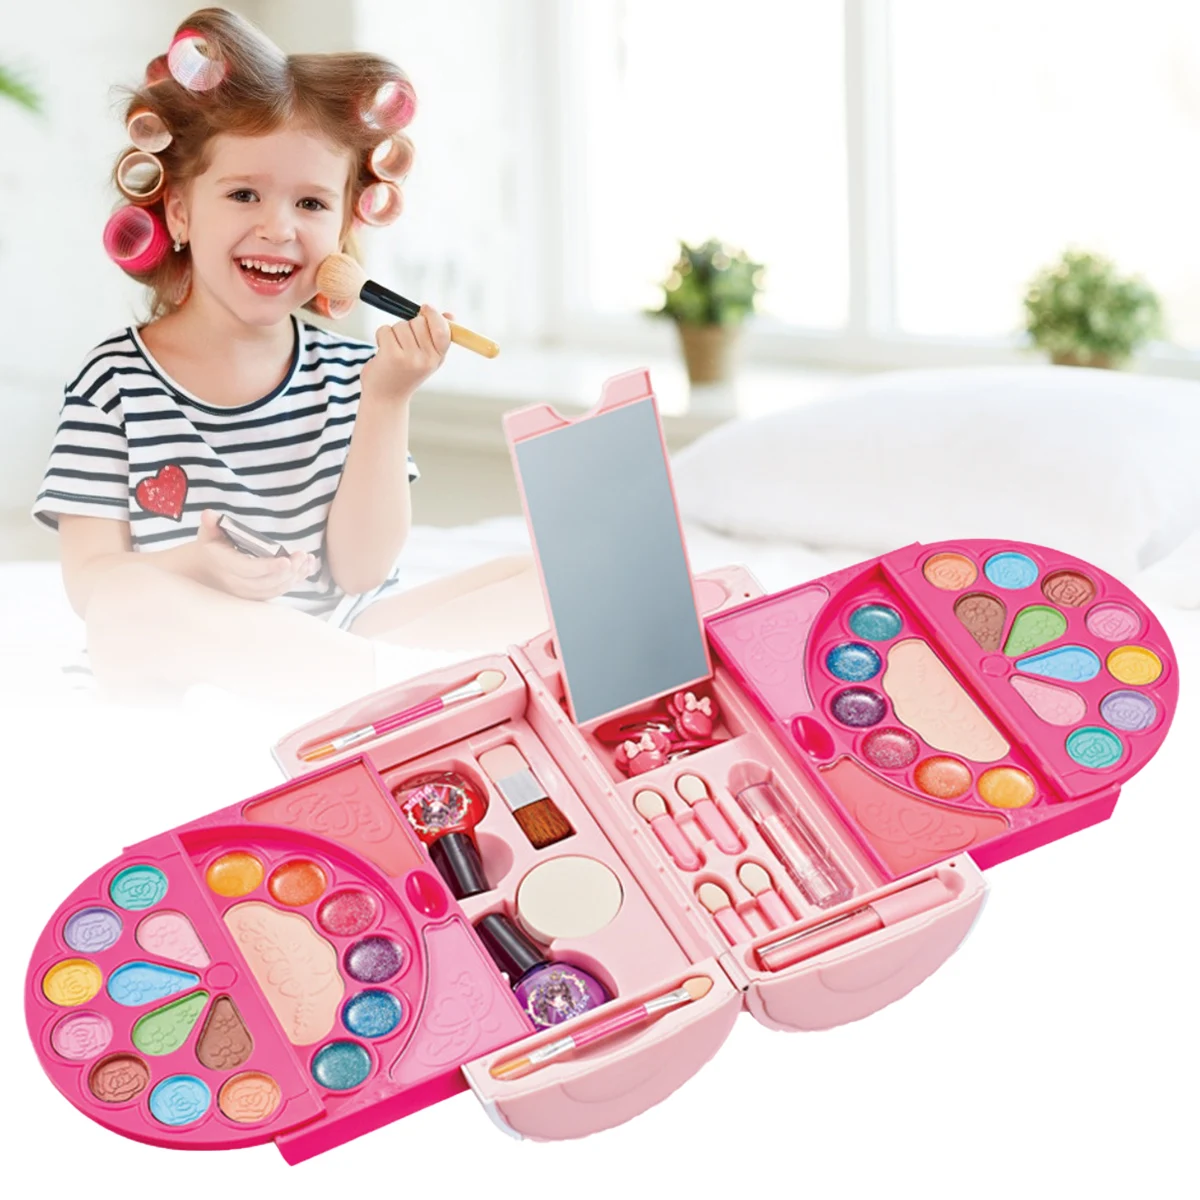 Girls Cosmetics Makeup Pretend Toy Kit Portable Make Up Washable Play Makeup Toys for Children Kids Christmas Gift Toys